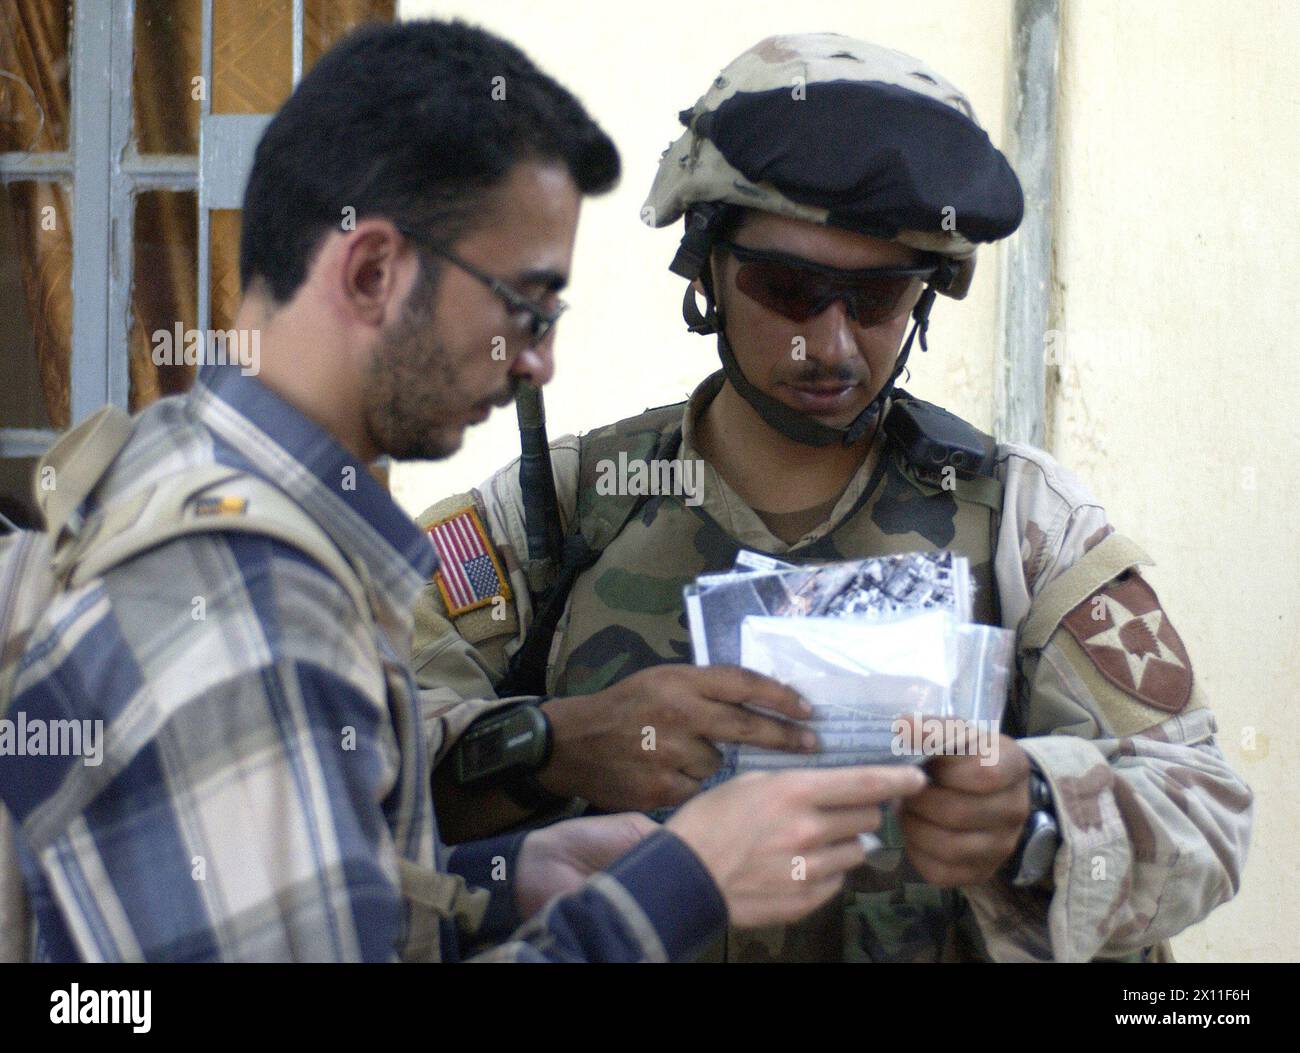 A soldier from 5th Battalion, 20th Infantry Regiment, 3rd Brigade, 2nd Infantry Division (Stryker Brigade Combat Team) and an interpreter review identification papers of a resident while multinational forces search his house in Qabr Abd, a city south of Mosul, during Operation Mayfield III, a cordon and search operation conducted on July 19 2004. Stock Photo